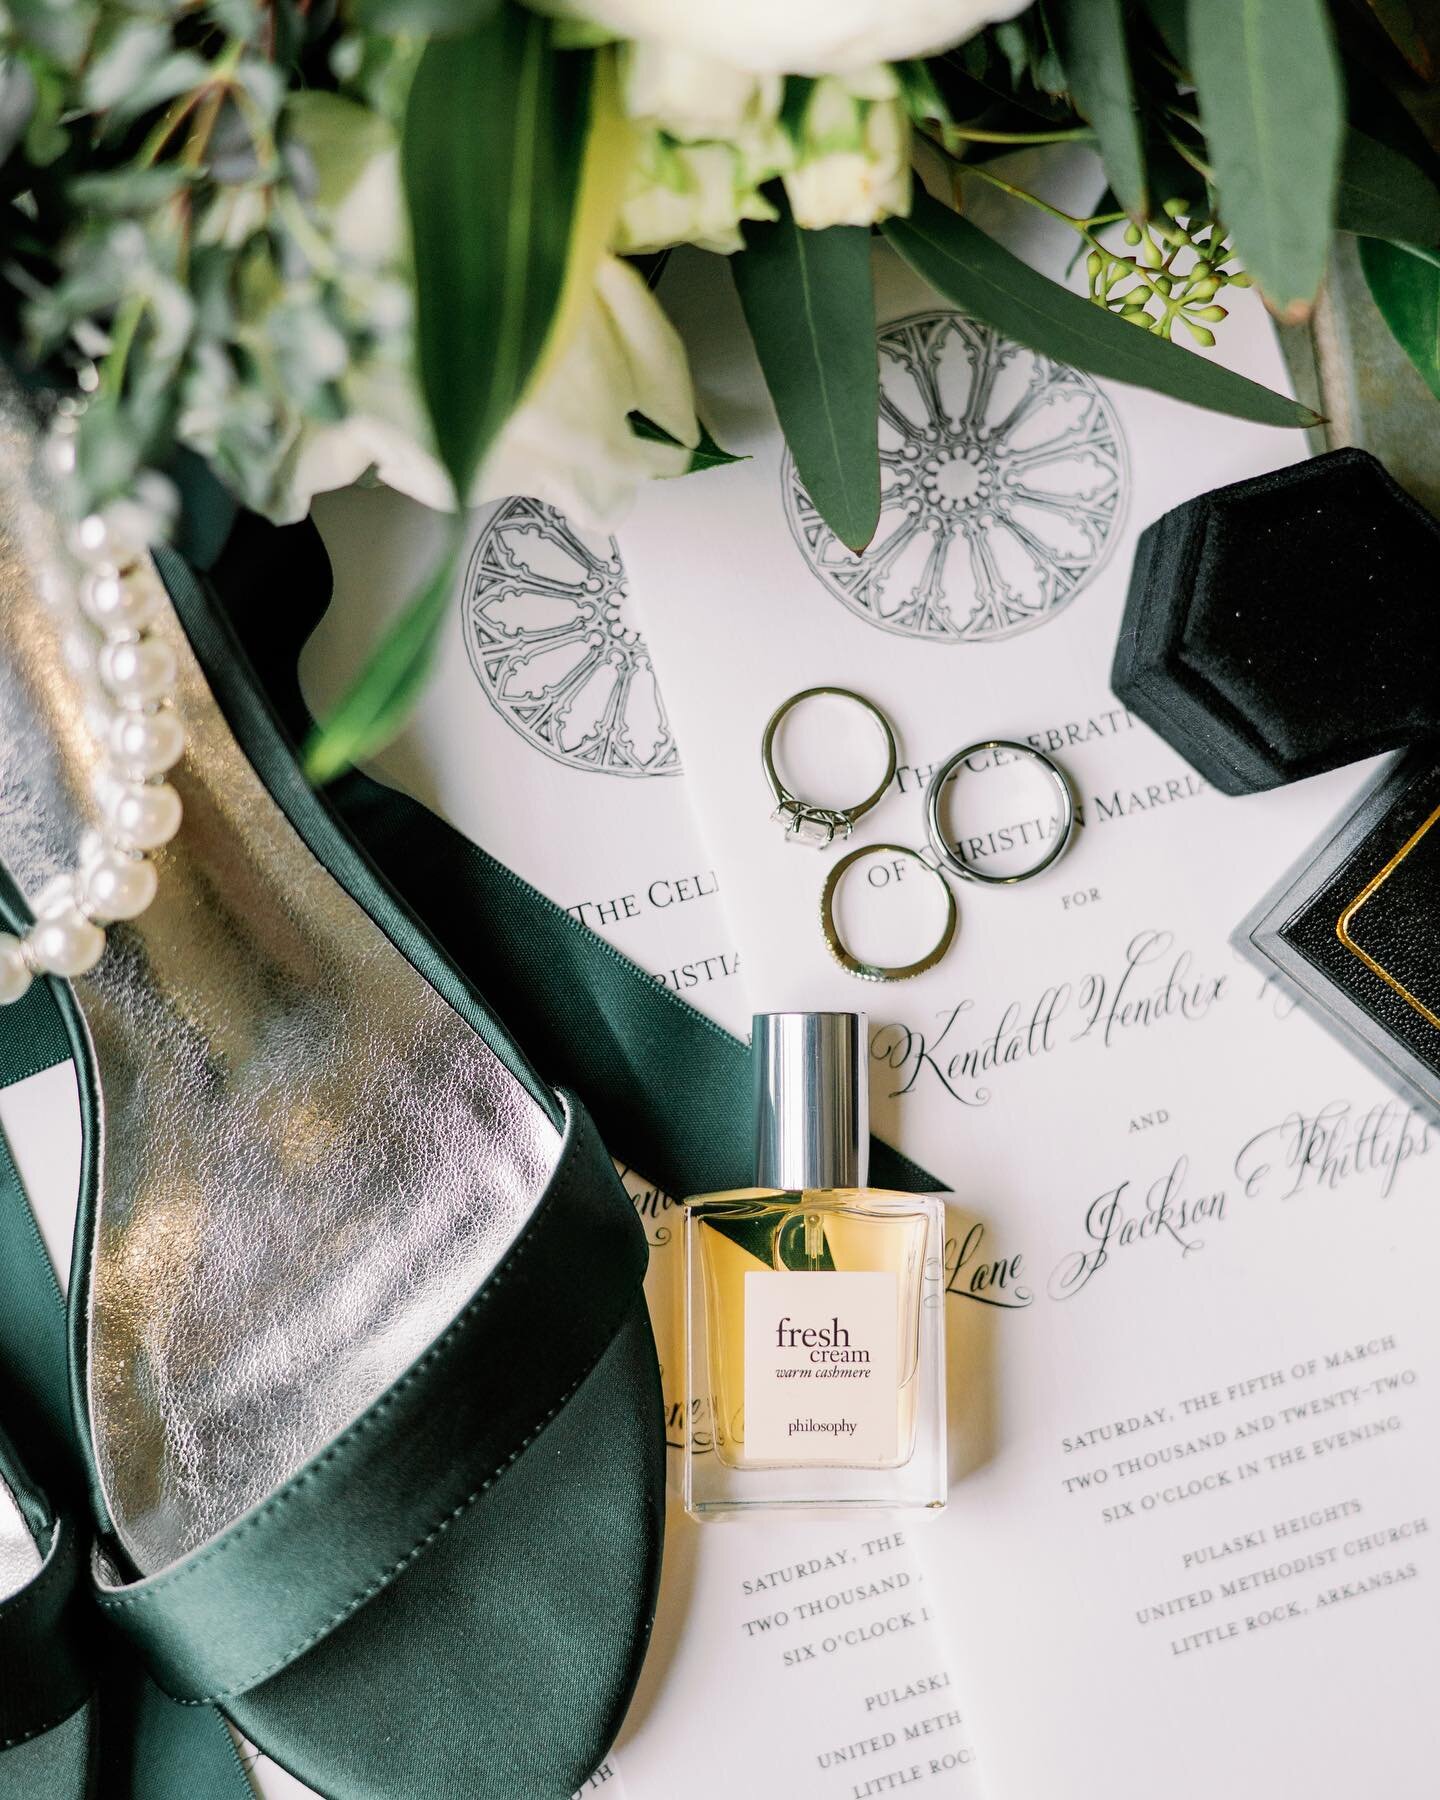 How lucky to find the one your soul loves 🌿💚 What a privilege to help Kendall &amp; Lane celebrate this special day 3.5.22.  @byrd_is_tha_word 

Month of Coordination: @liliasandolive, @maddiebschmidt 
Venue: PHUMC, @juniorleaguelr 
Caterer: @herit